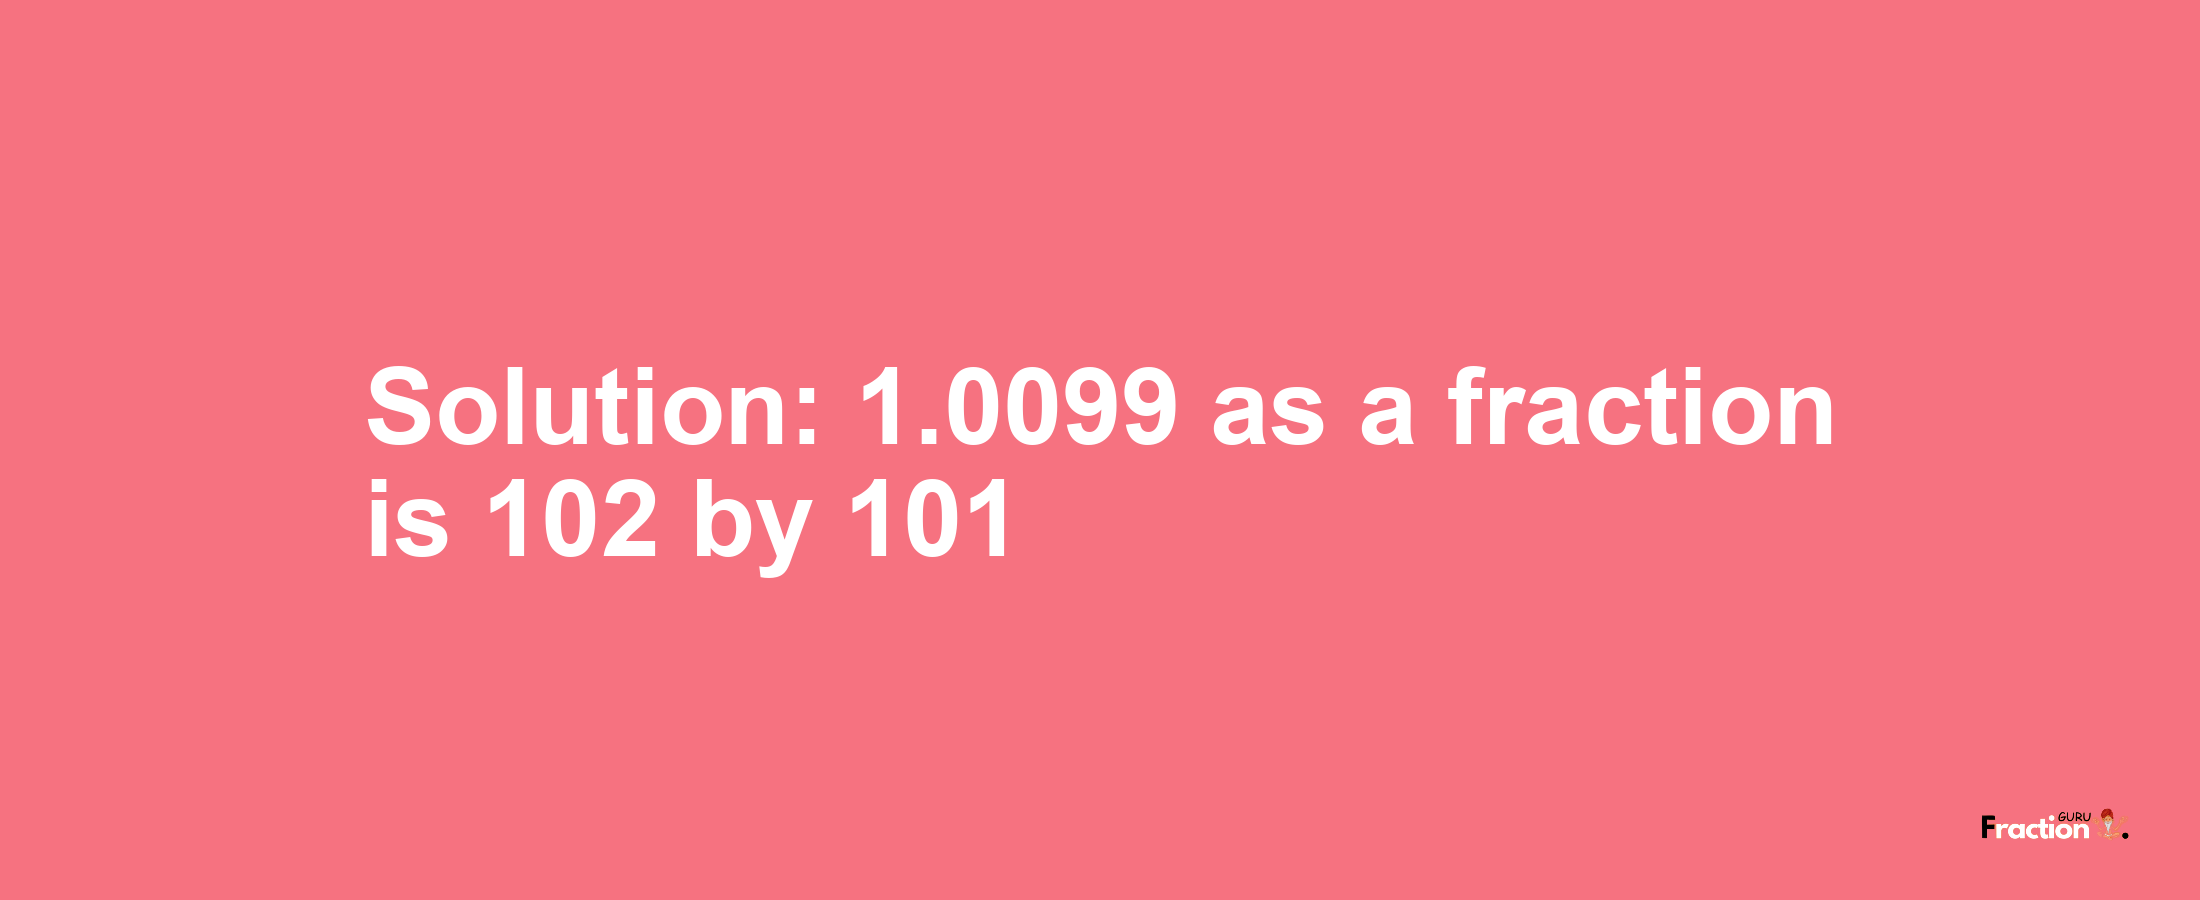 Solution:1.0099 as a fraction is 102/101